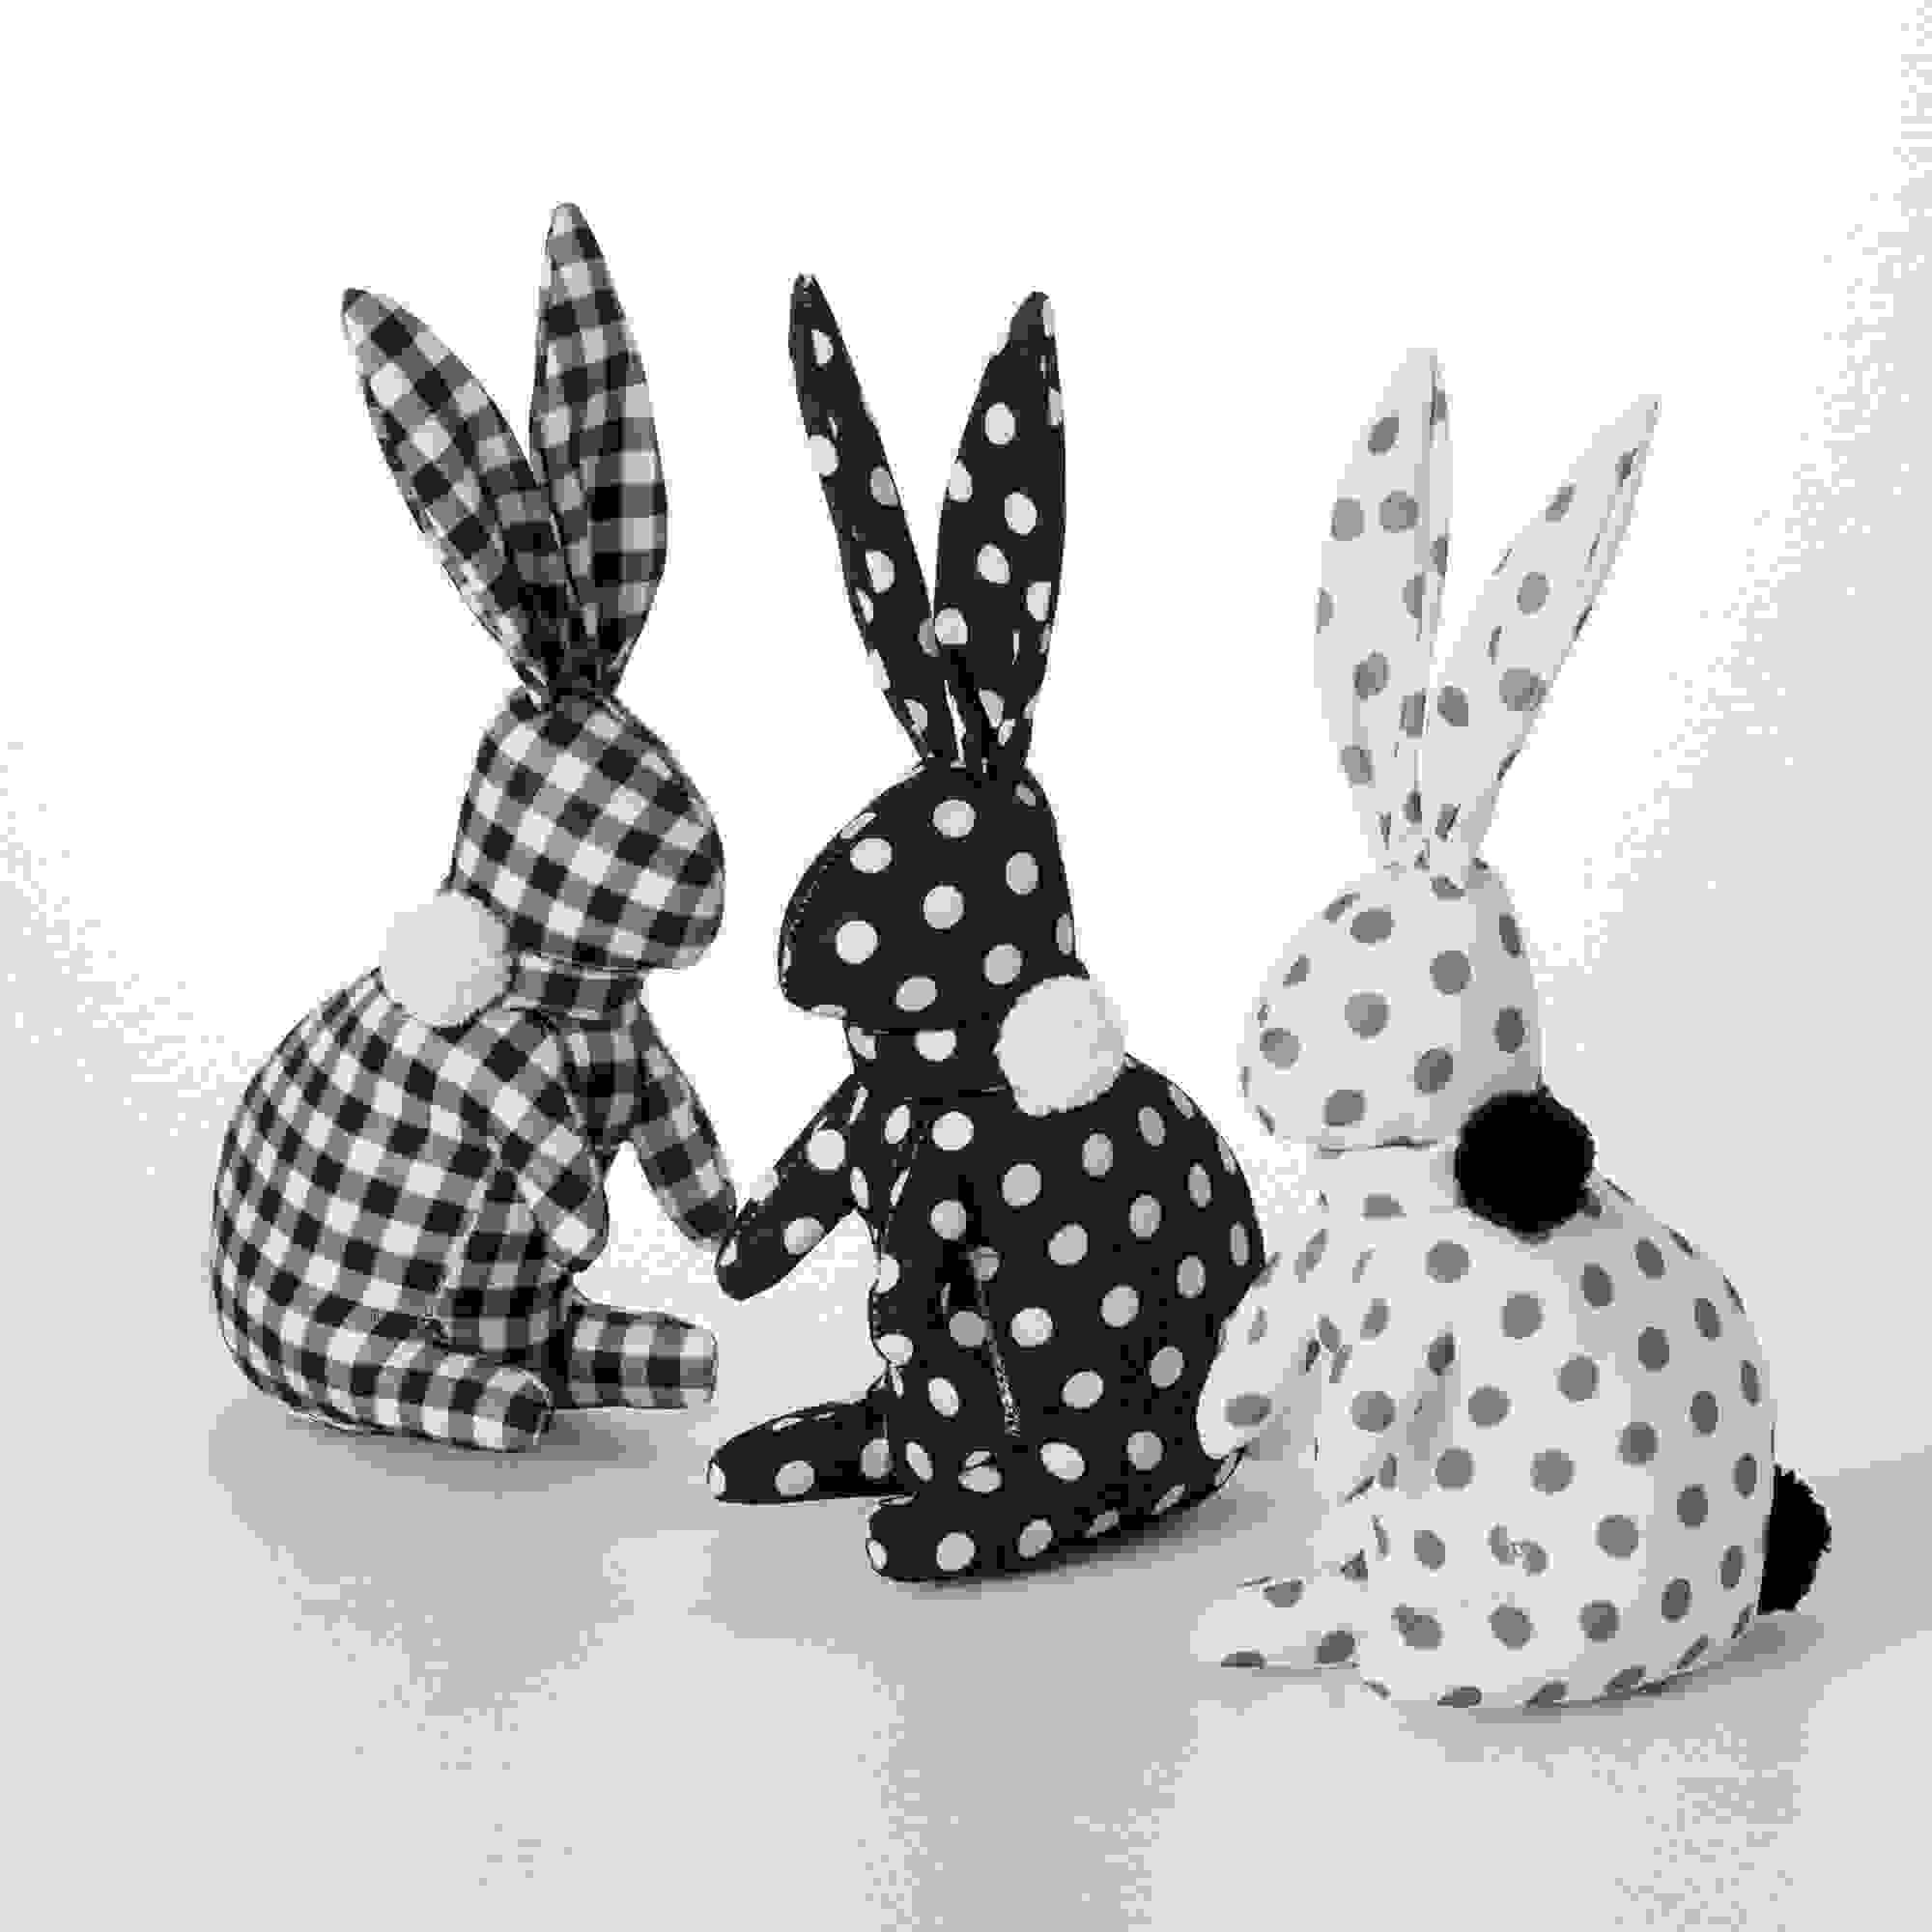 PATTERNED TEXTILE BUNNY TRIO